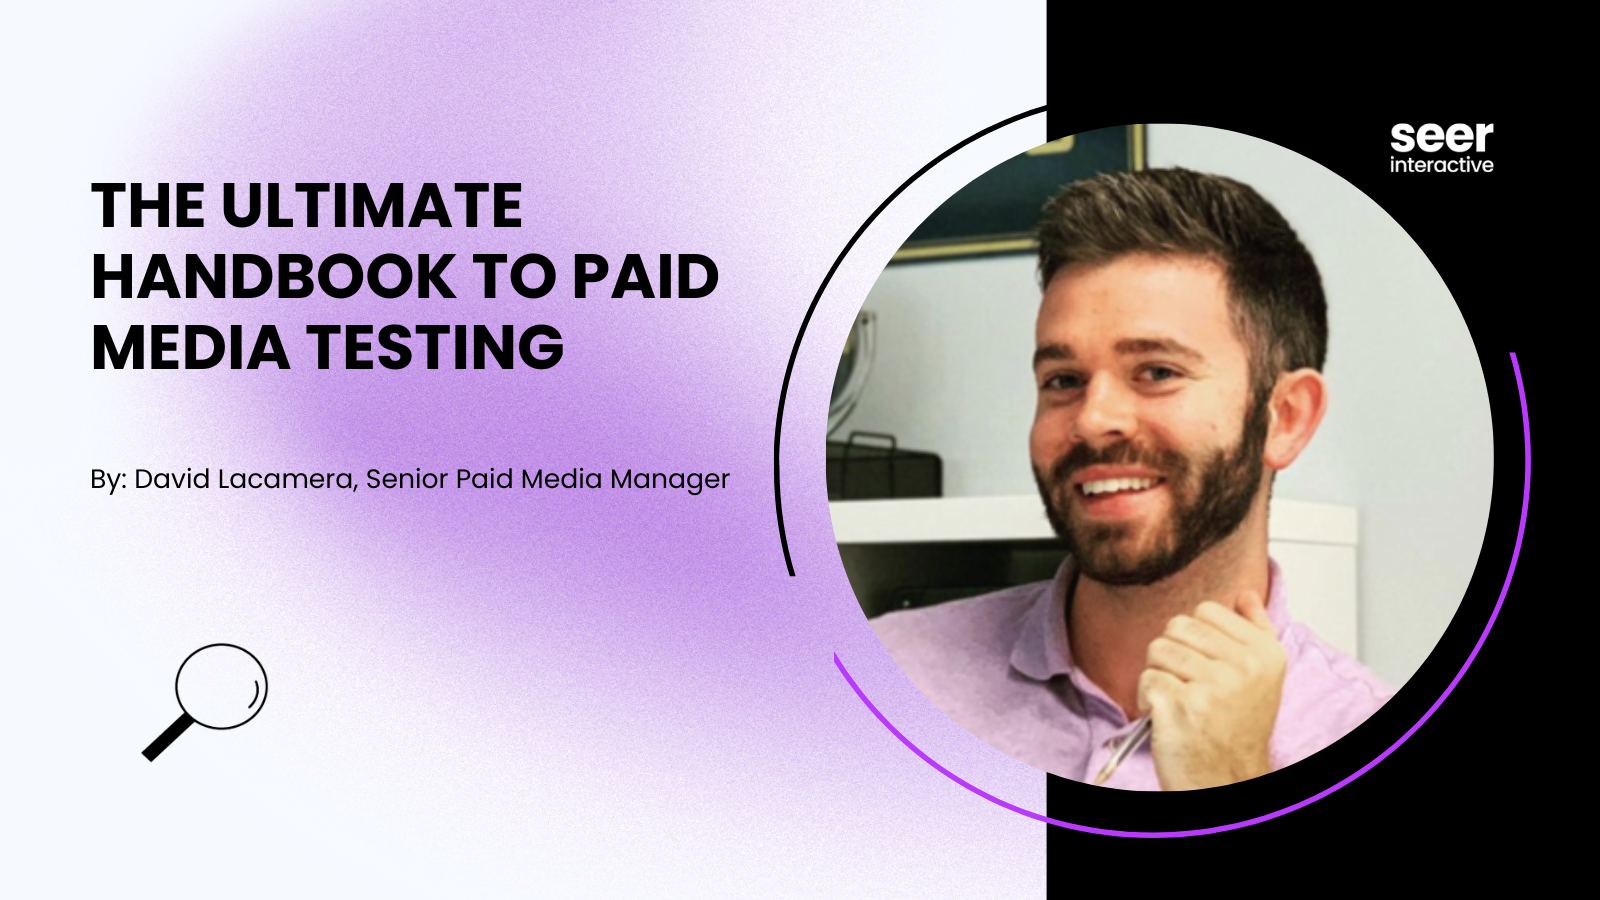 The Ultimate Handbook for Paid Media Testing